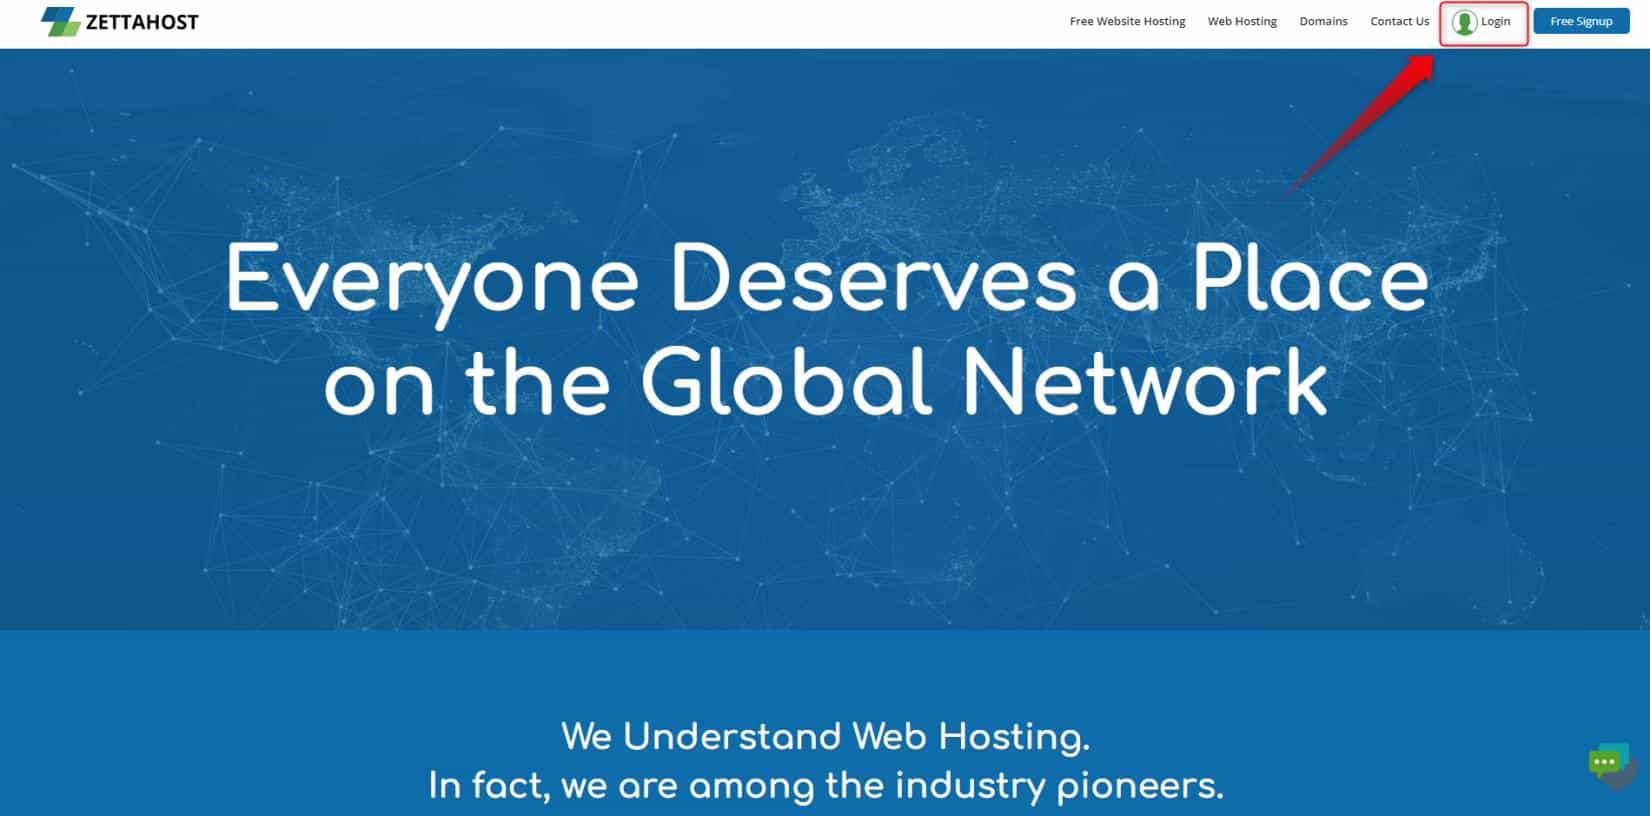 The ZETTAHOST Home Page